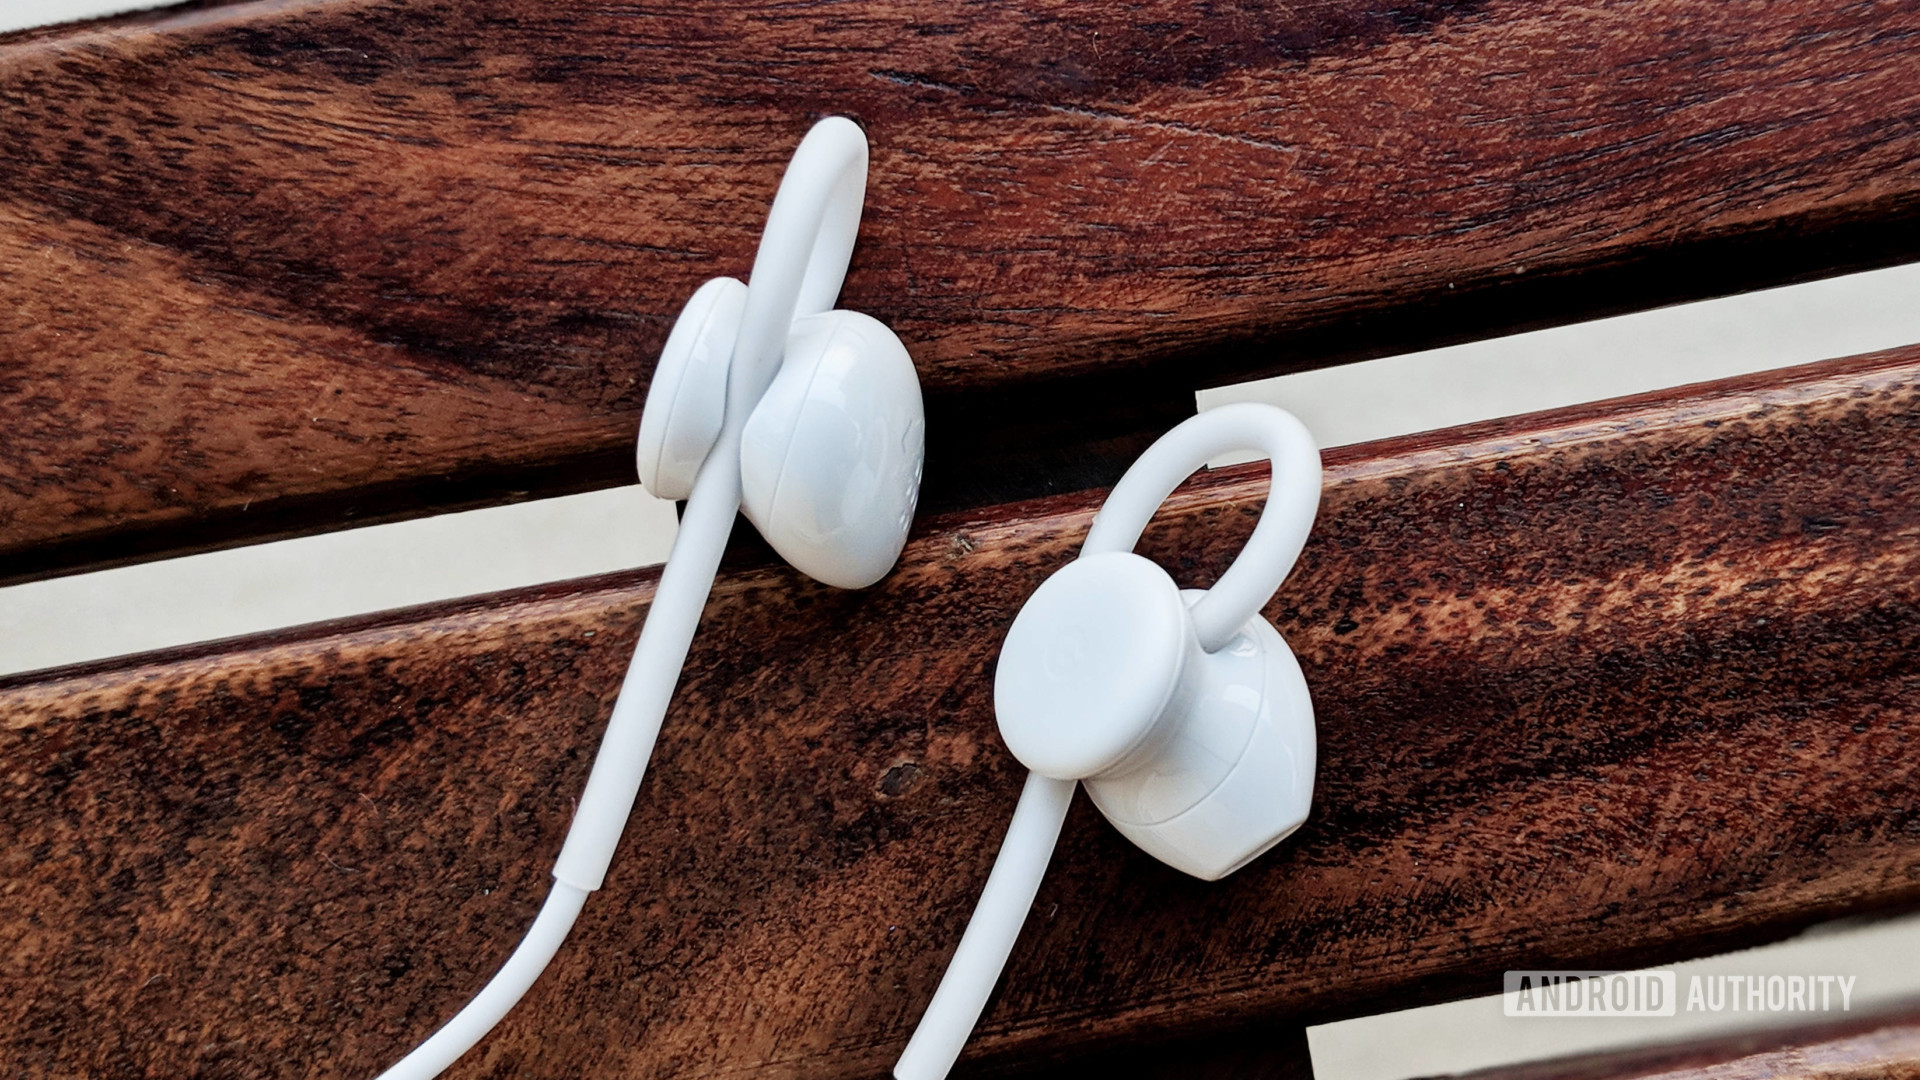 Pixel USB-C earbuds in white on wooden surface.